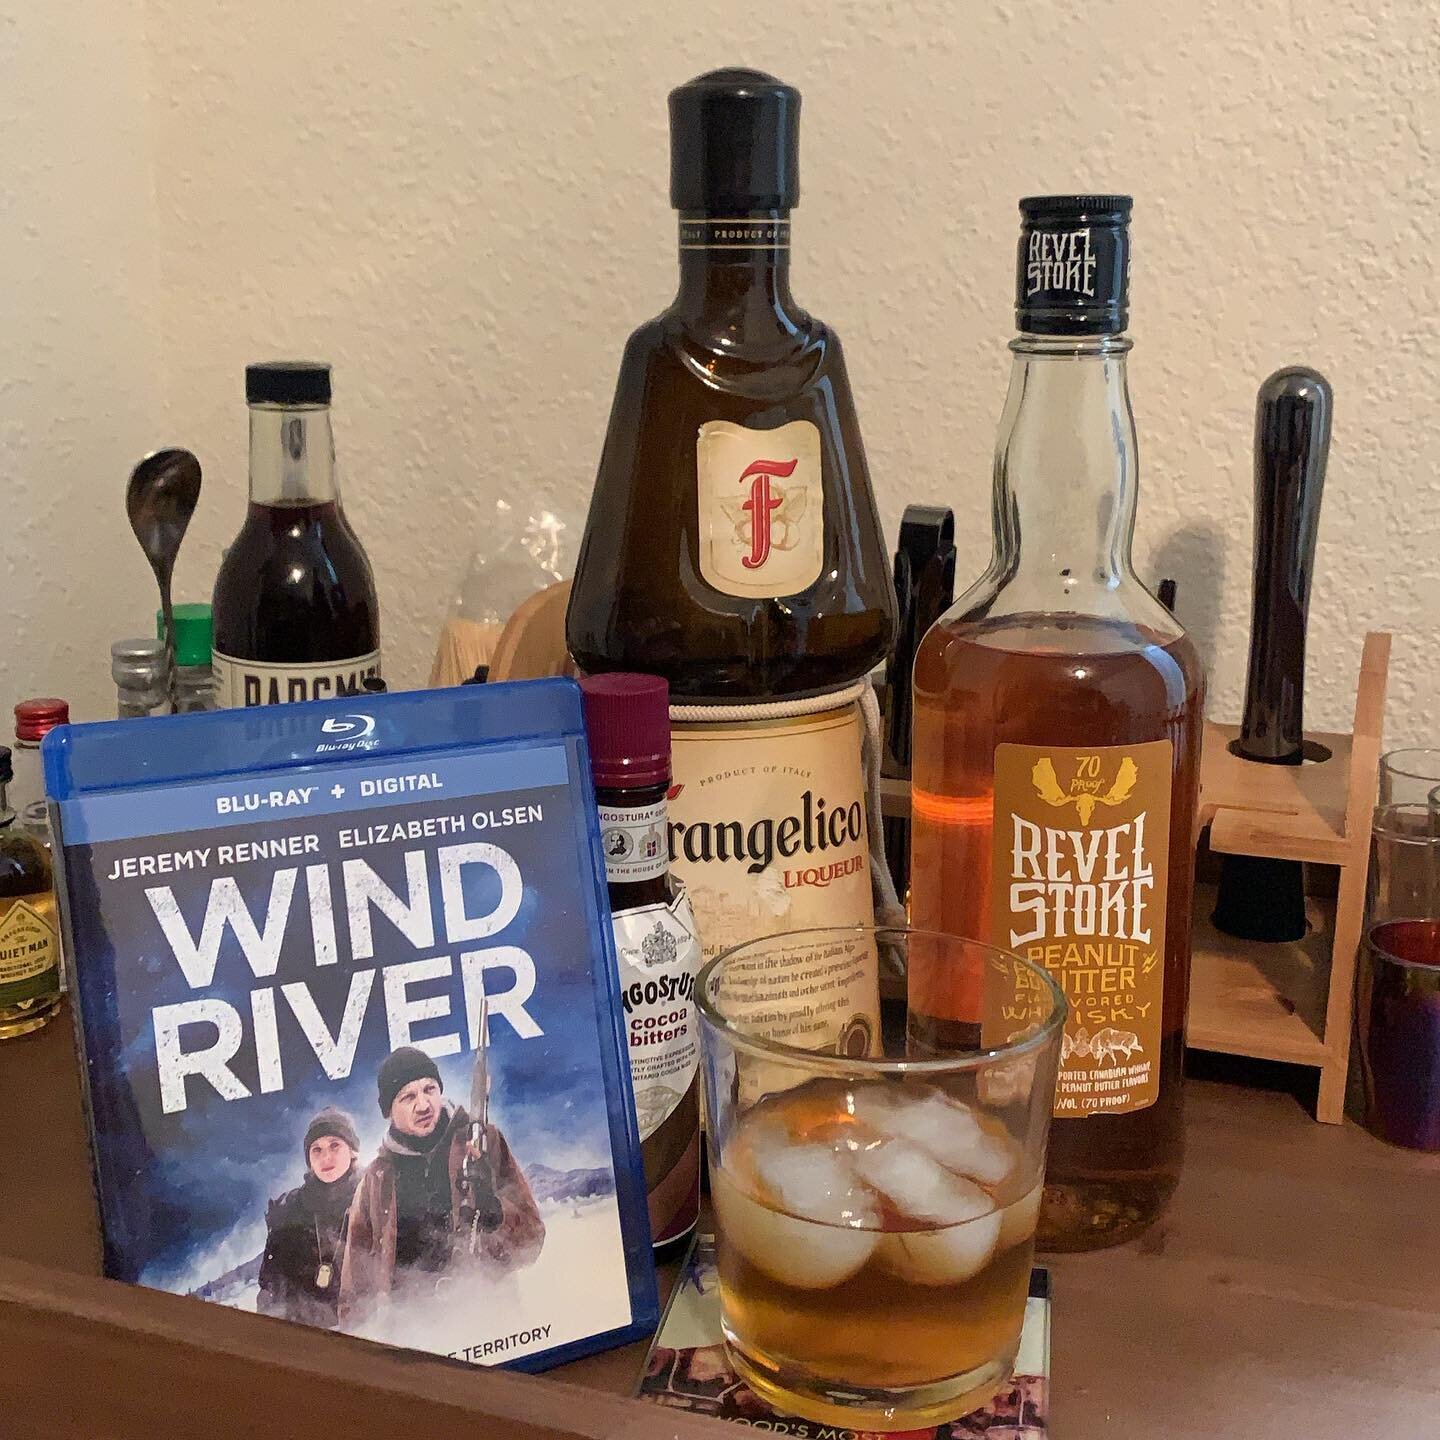 Wind River and a peanut butter hazelnut joint task force

&bull;2oz of Fish and Wildlife Officer Peanut Butter Whiskey
&bull;1oz of FBI Agent Frangelico
&bull;.5oz of maple syrup
&bull; 4 dashes of cocoa bitters